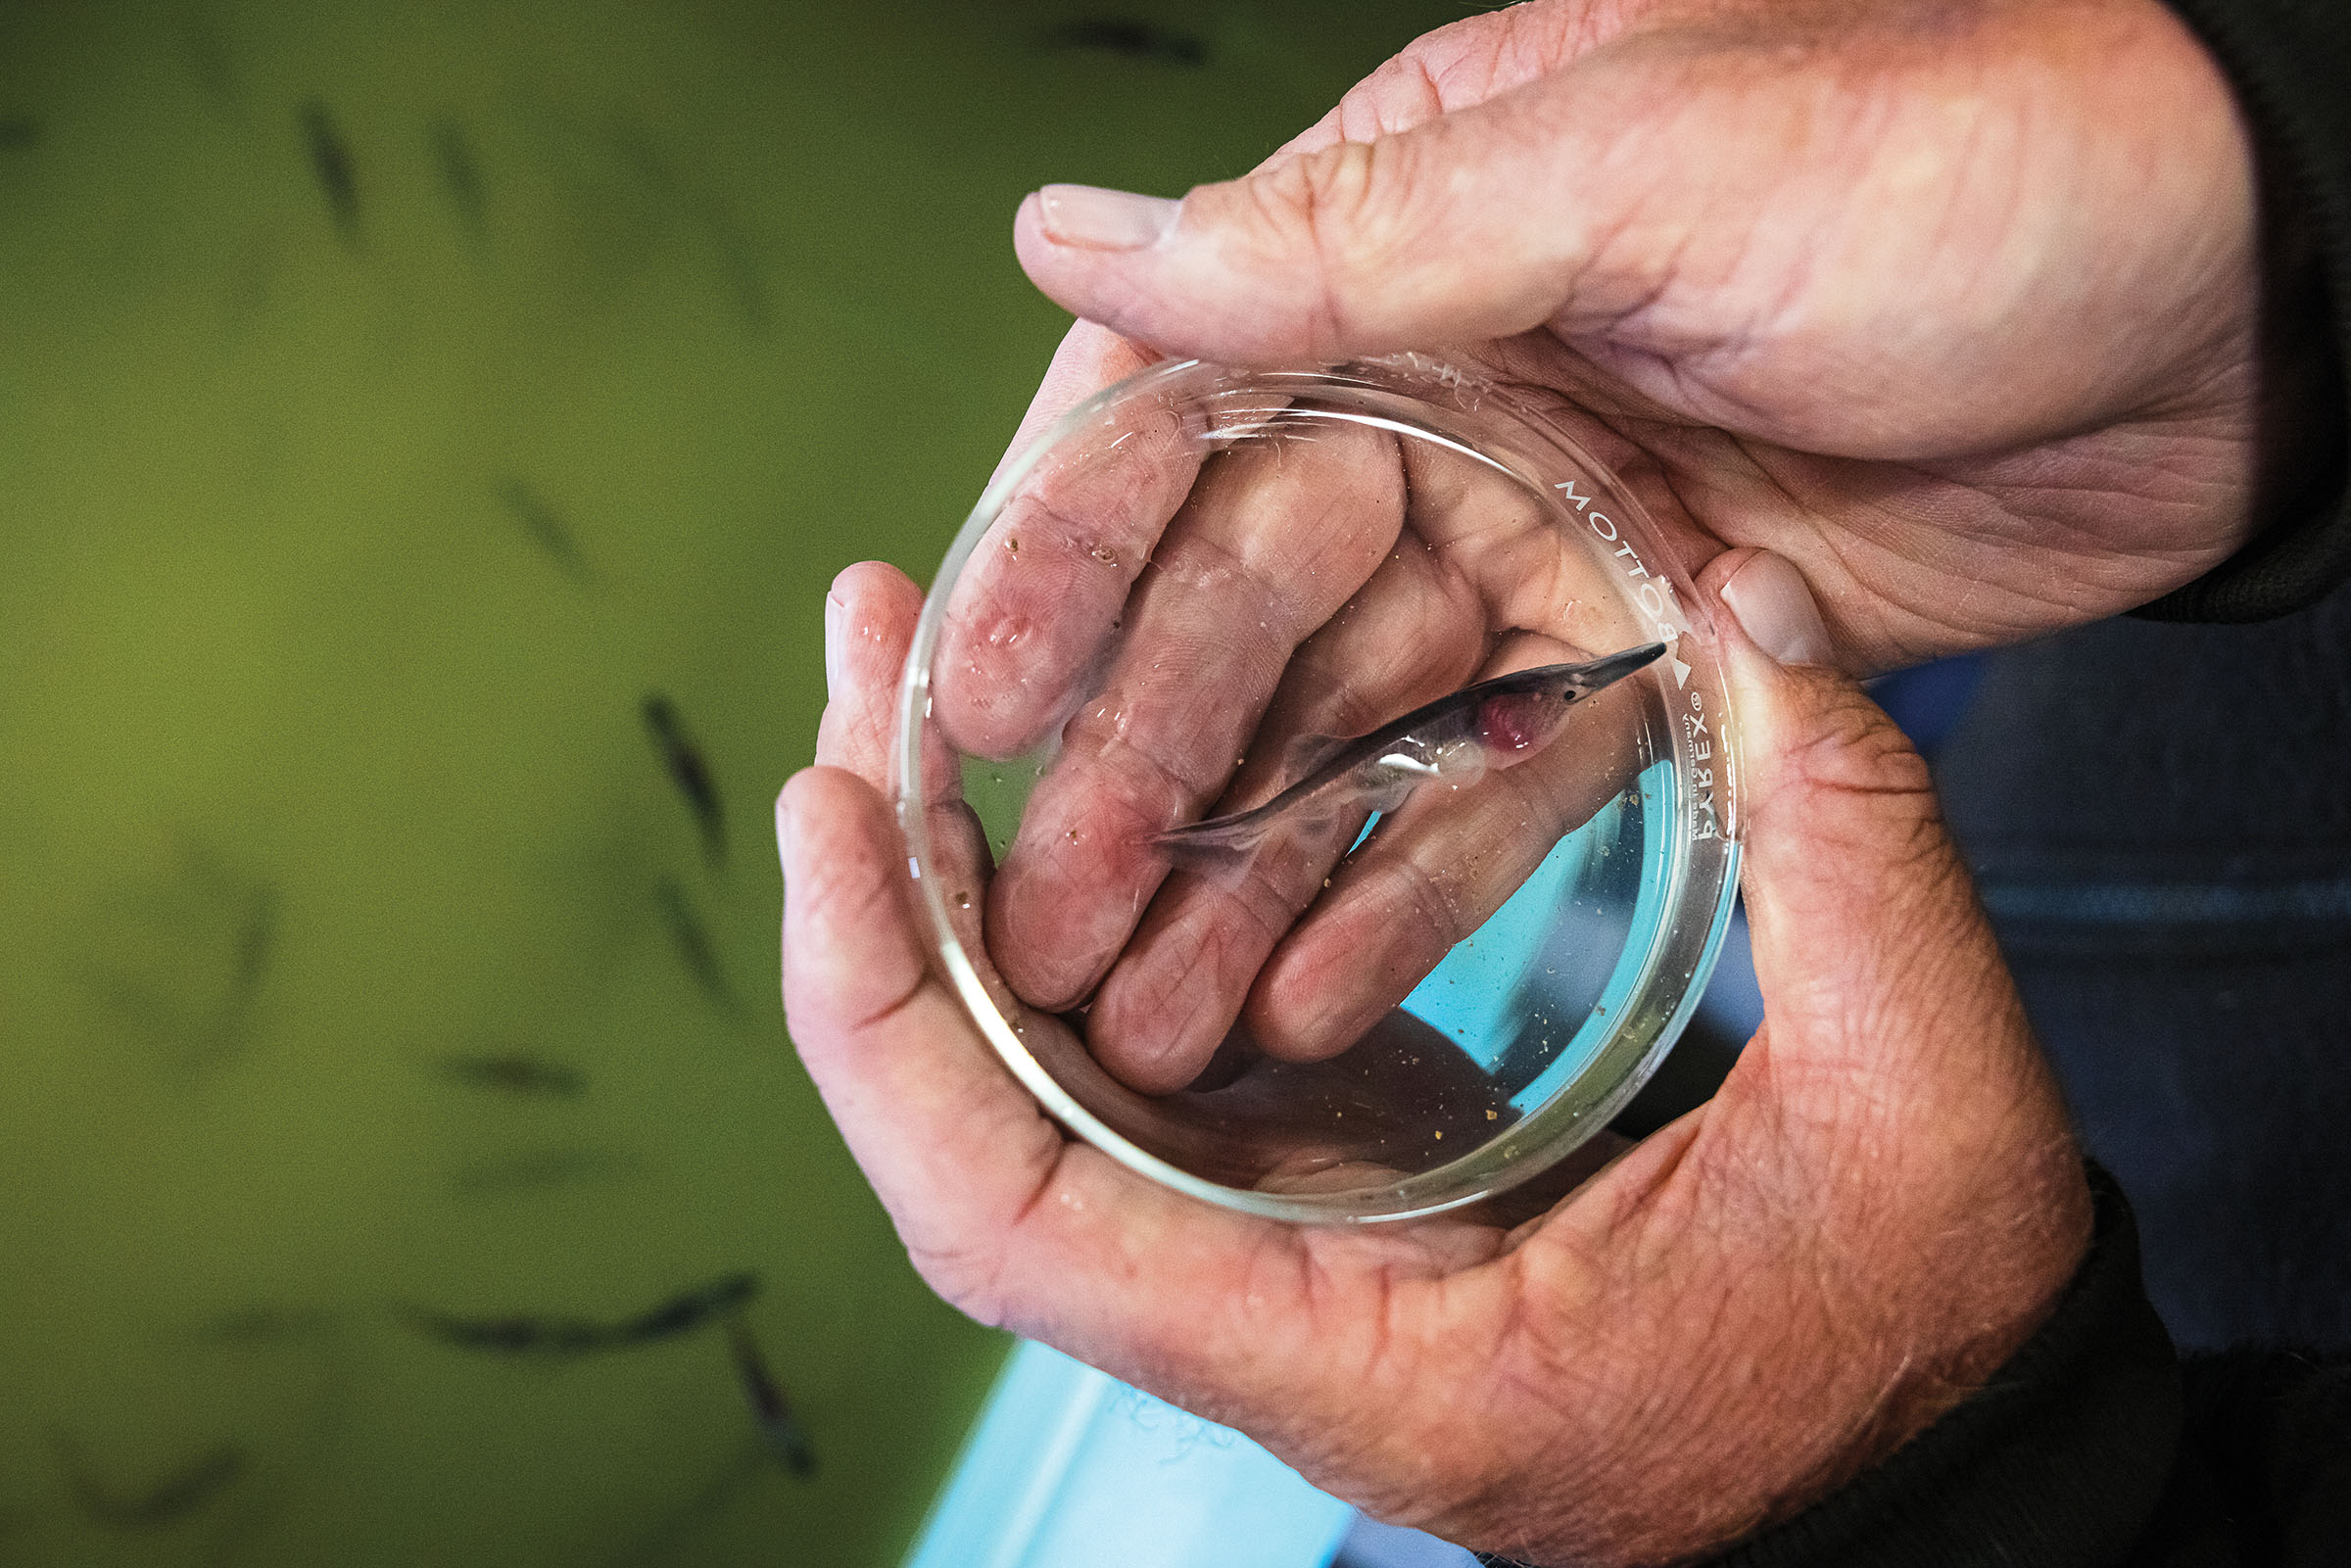 A person holds a small glass dish with a tiny fish in it